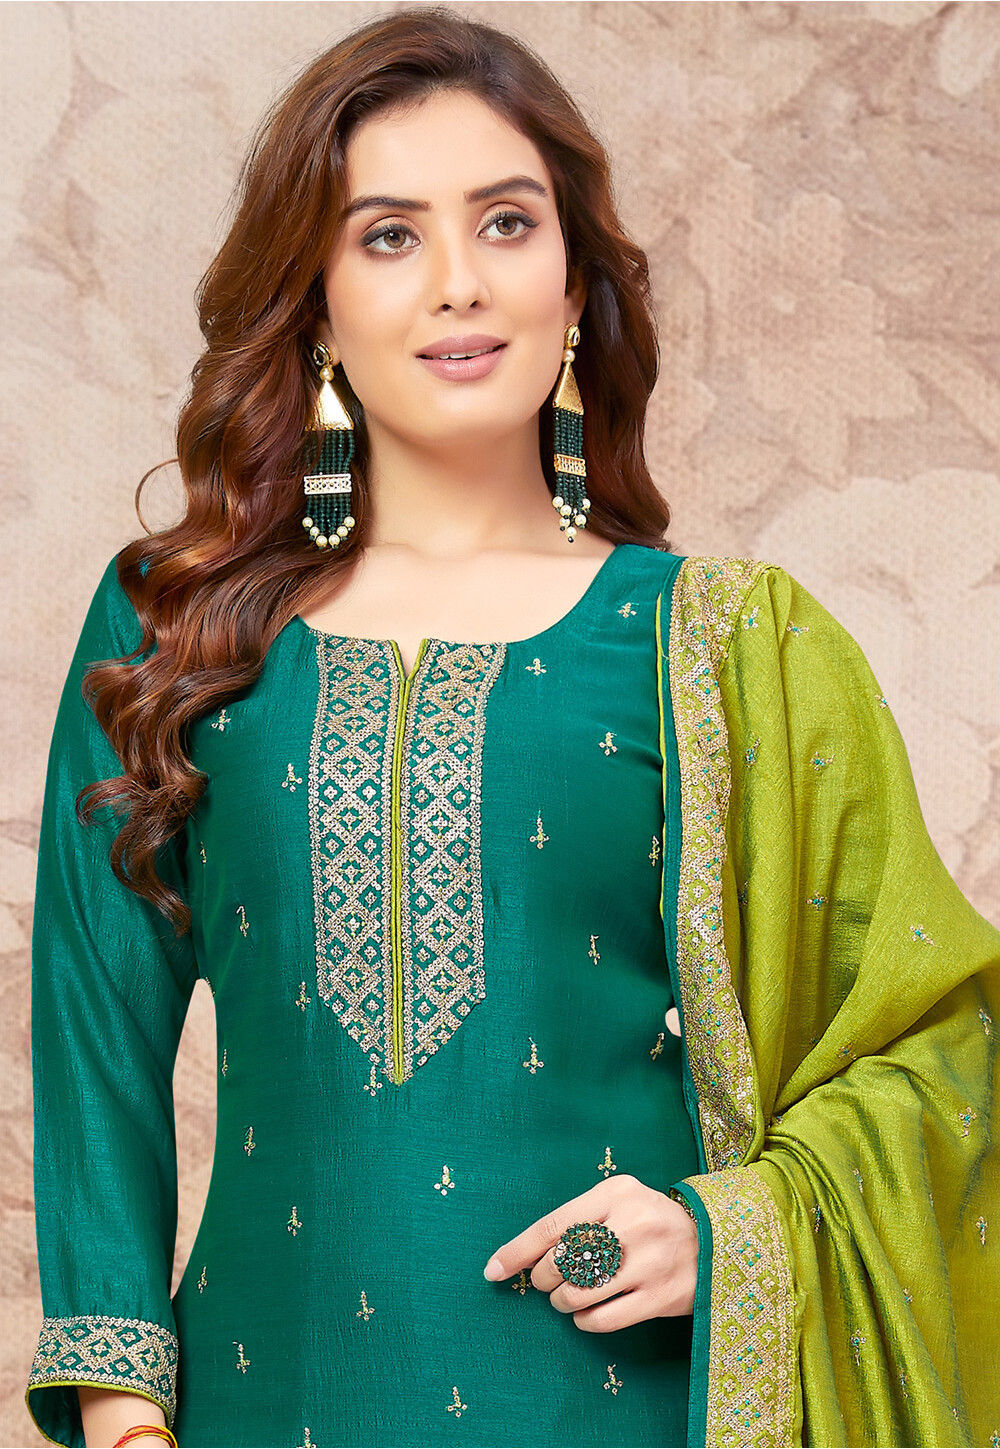 Embroidered Art Silk Pakistani Suit in Teal Green : KGZT5142